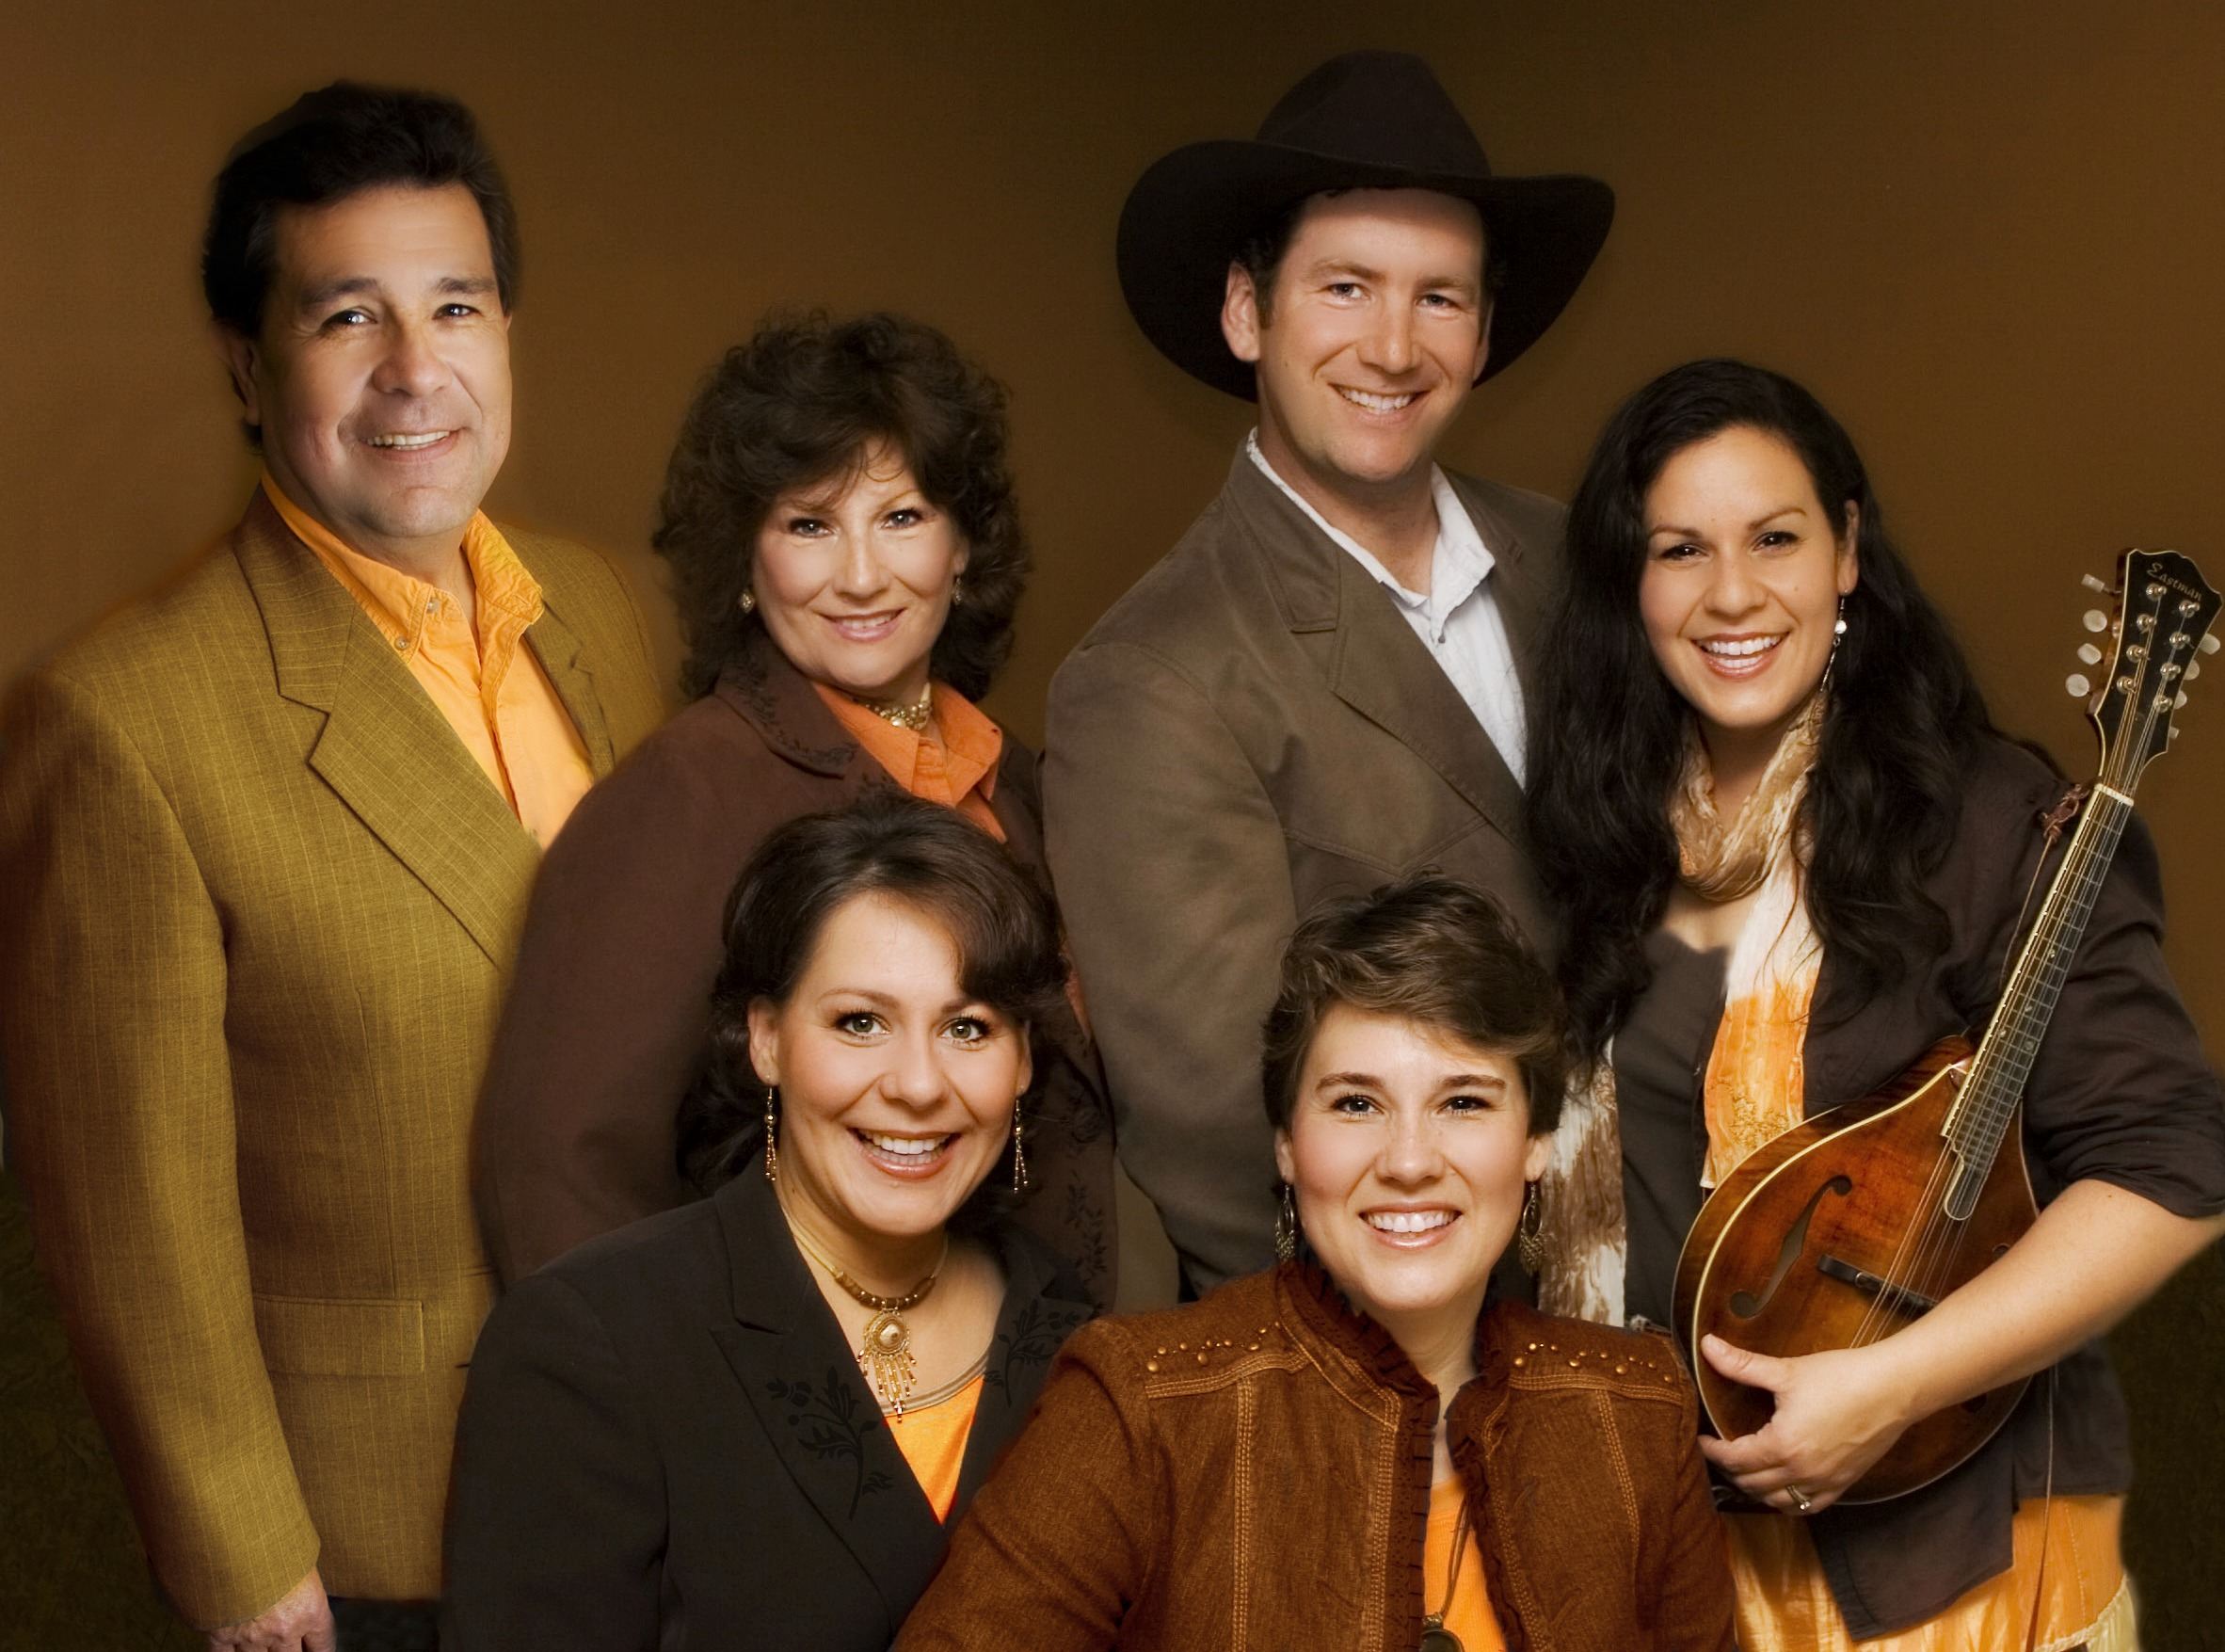 SWEET SOUNDS - The Singing Hills are just one of many acclaimed Gospel groups to be featured during Canada's Gospel Music Celebration at Westerner Park July 10-12th.